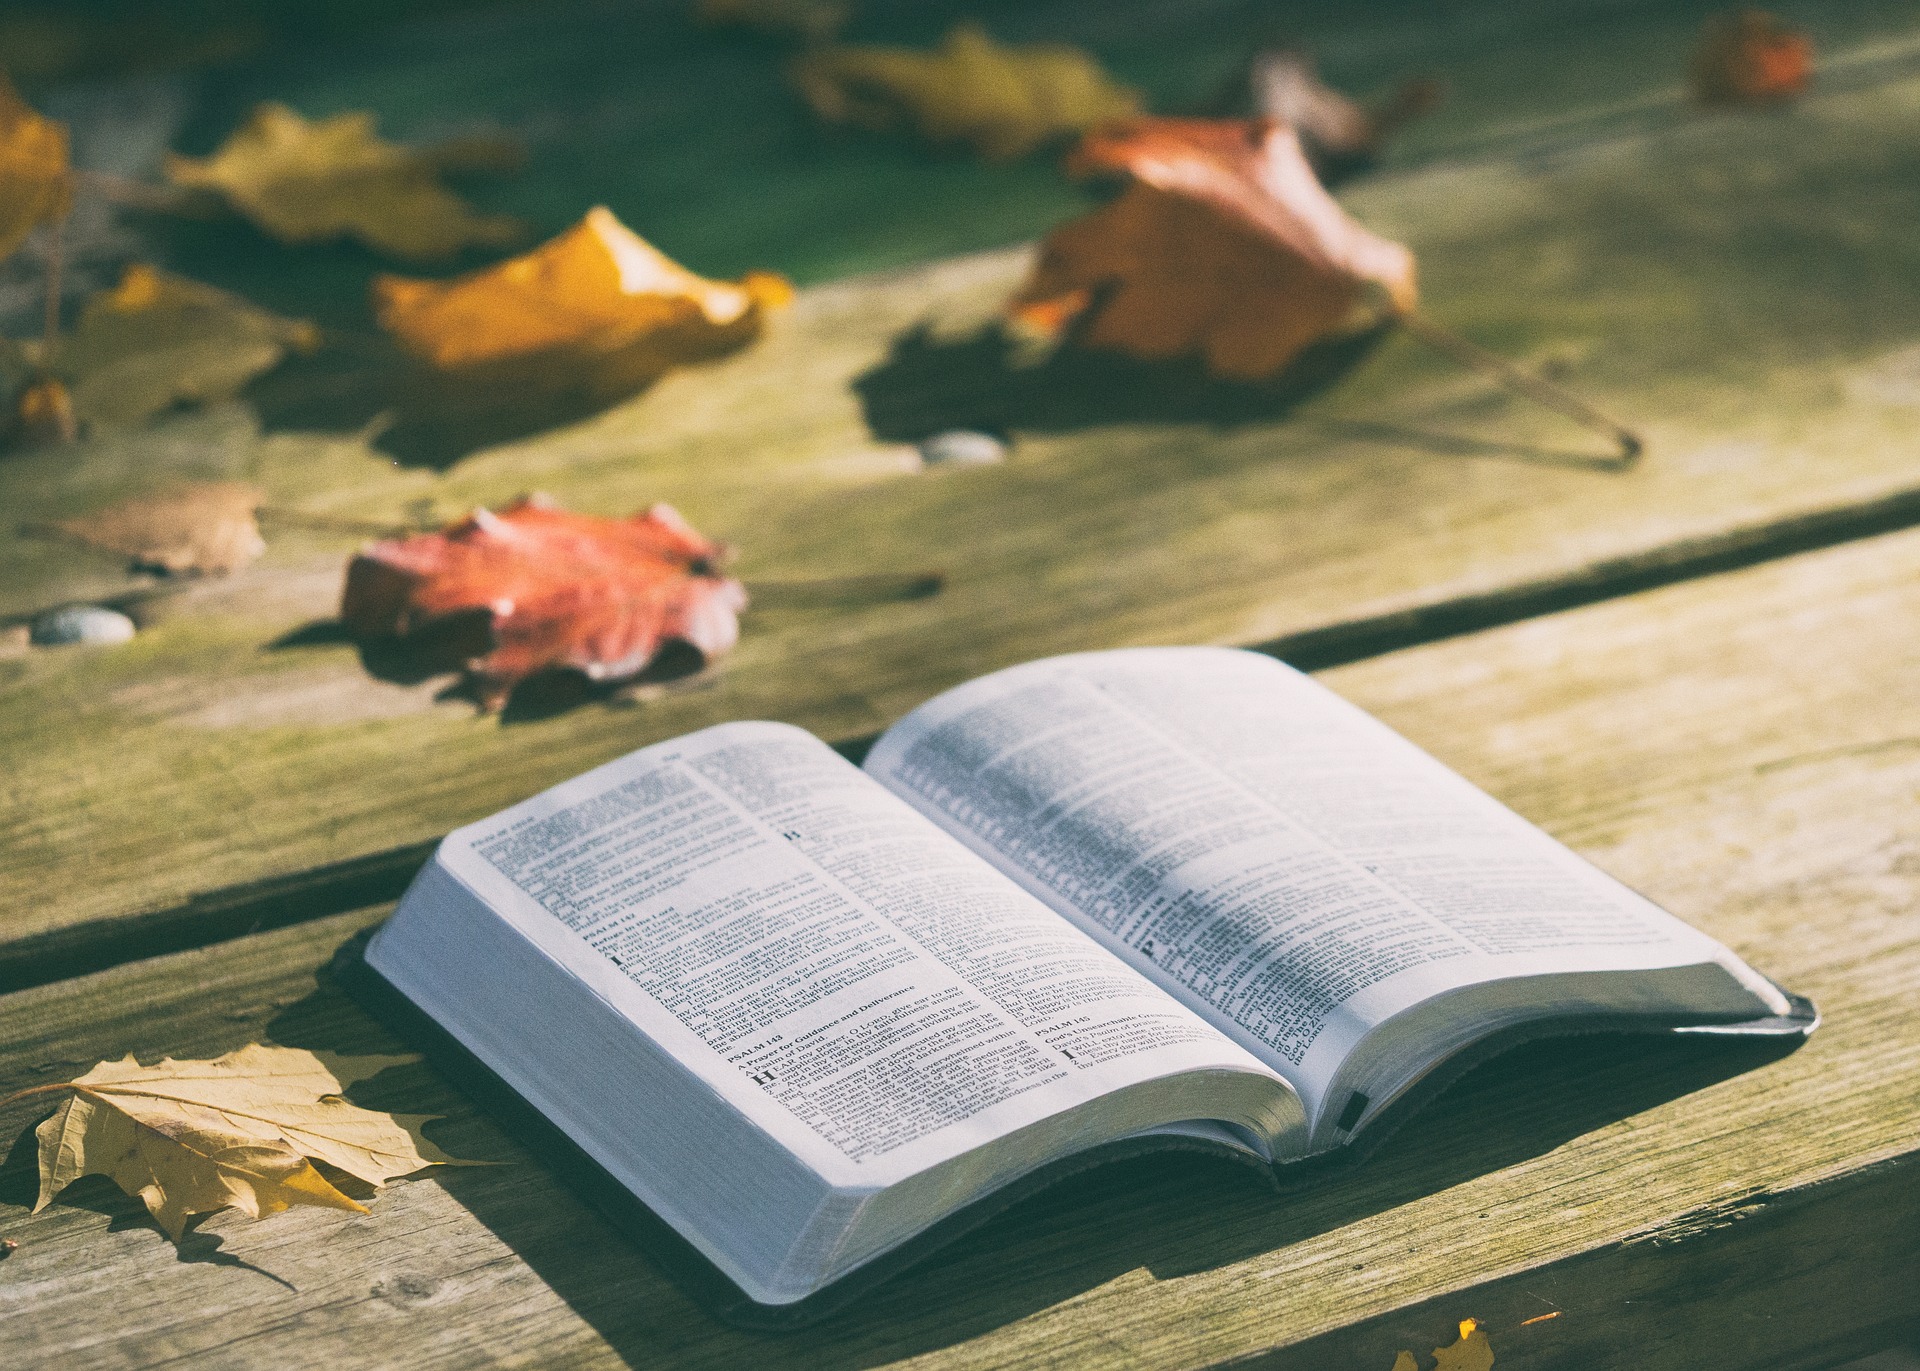 Studying Scripture to Hear God's Voice